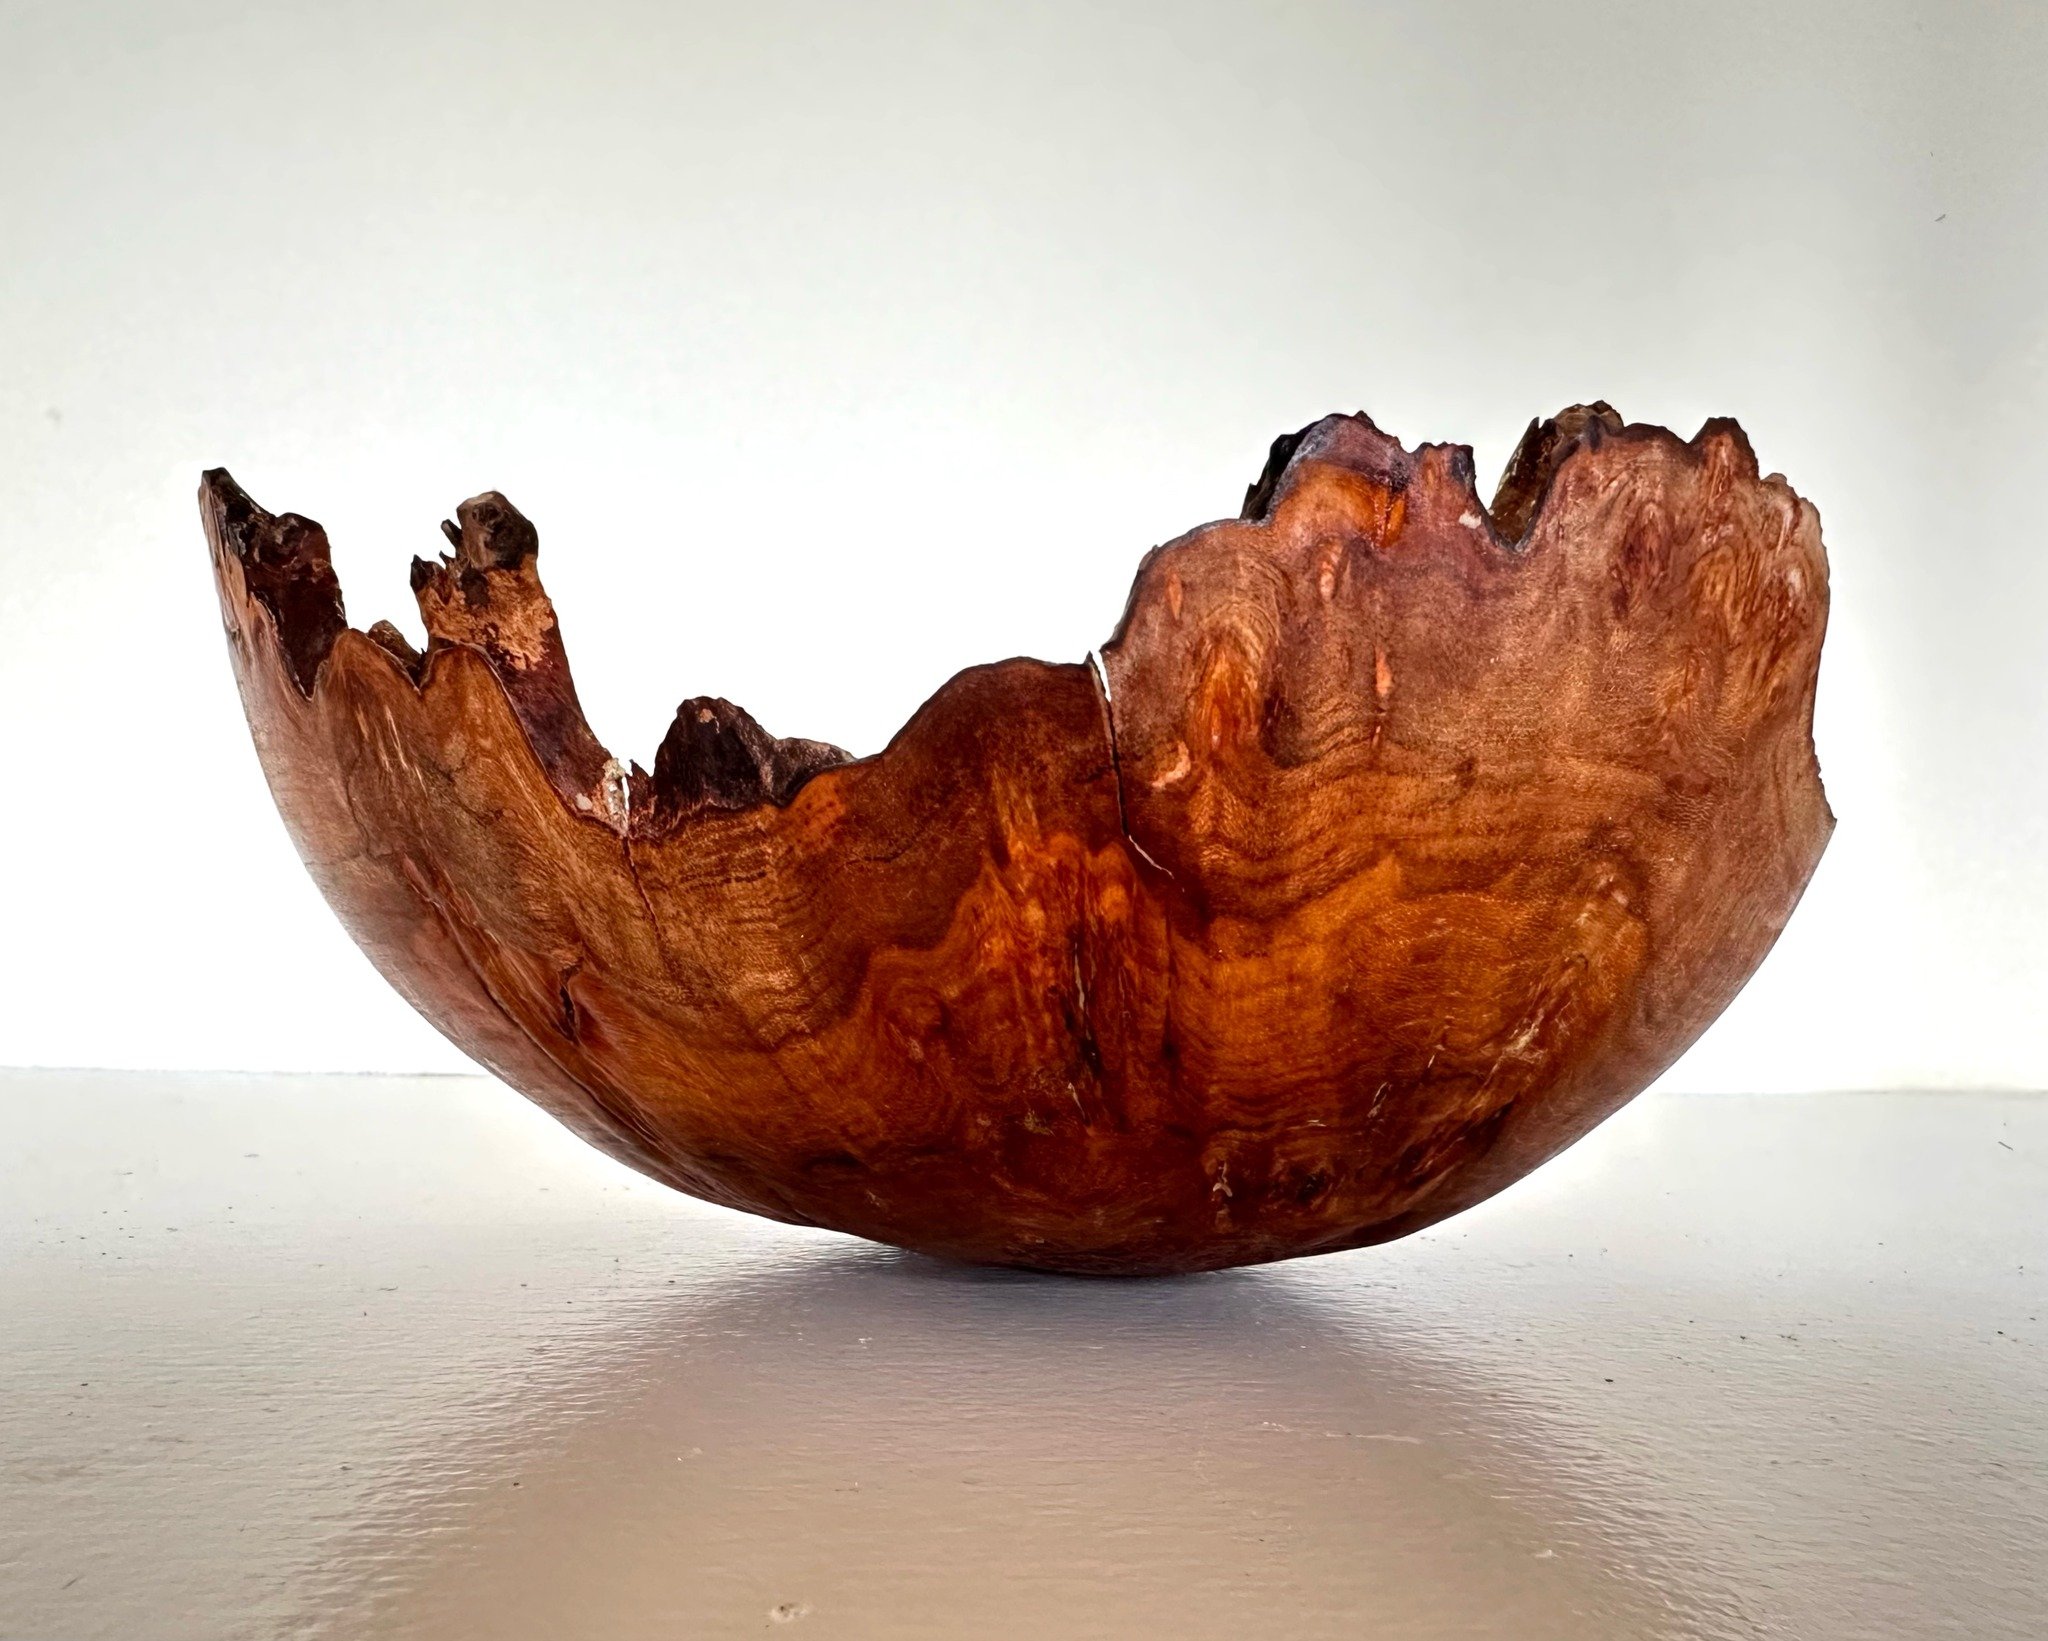 Steve Husband has popped into the art auction and written a few words to tell the story of his beautiful hand-turned bowl:

&quot;This bowl is made of elm wood from a tree growing near Leckmelm which was a sapling at the times of the clearances, as l